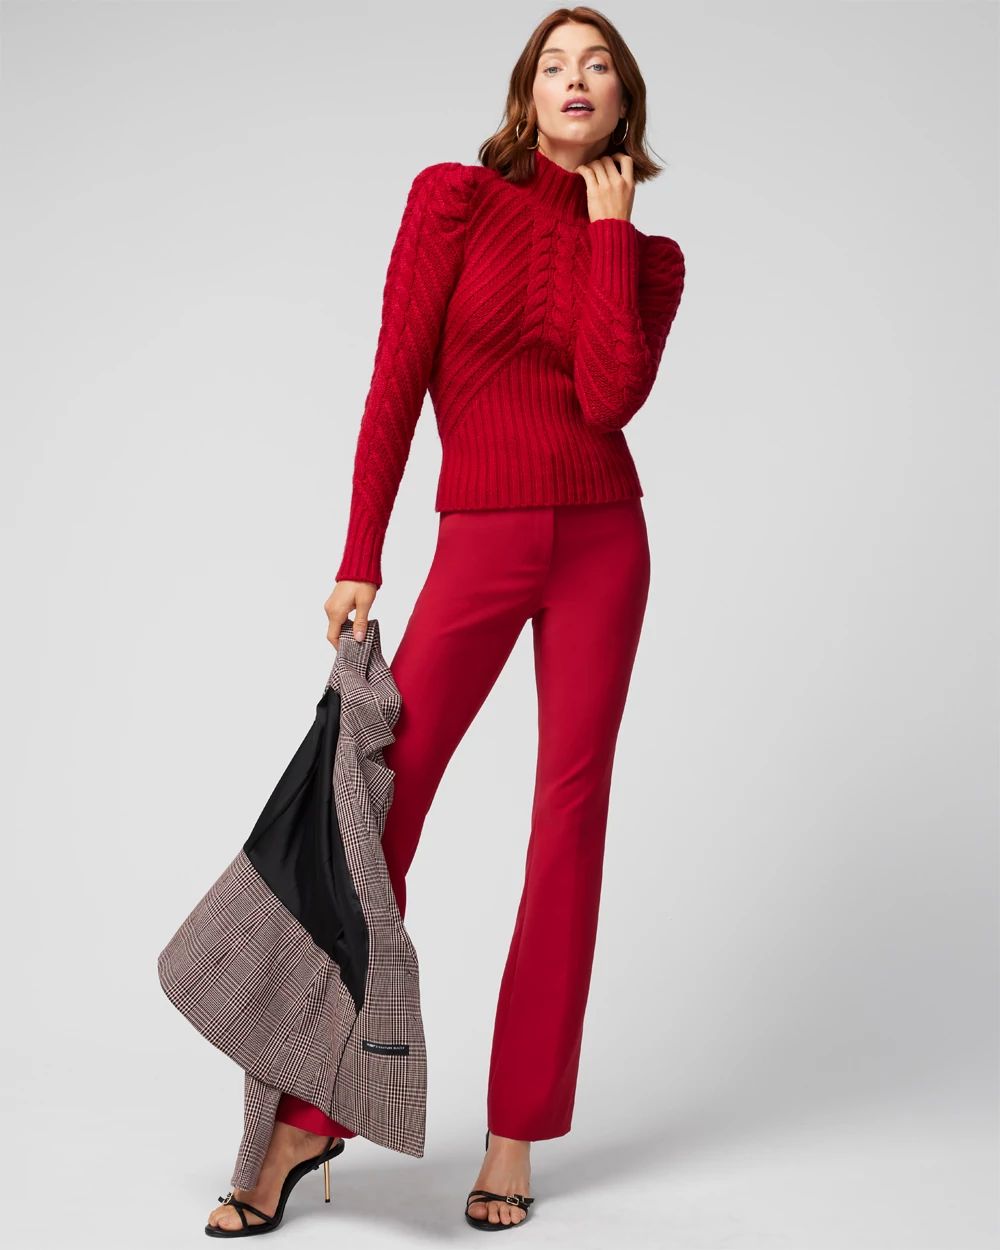 Petite Puff Sleeve Cable Mockneck Sweater click to view larger image.